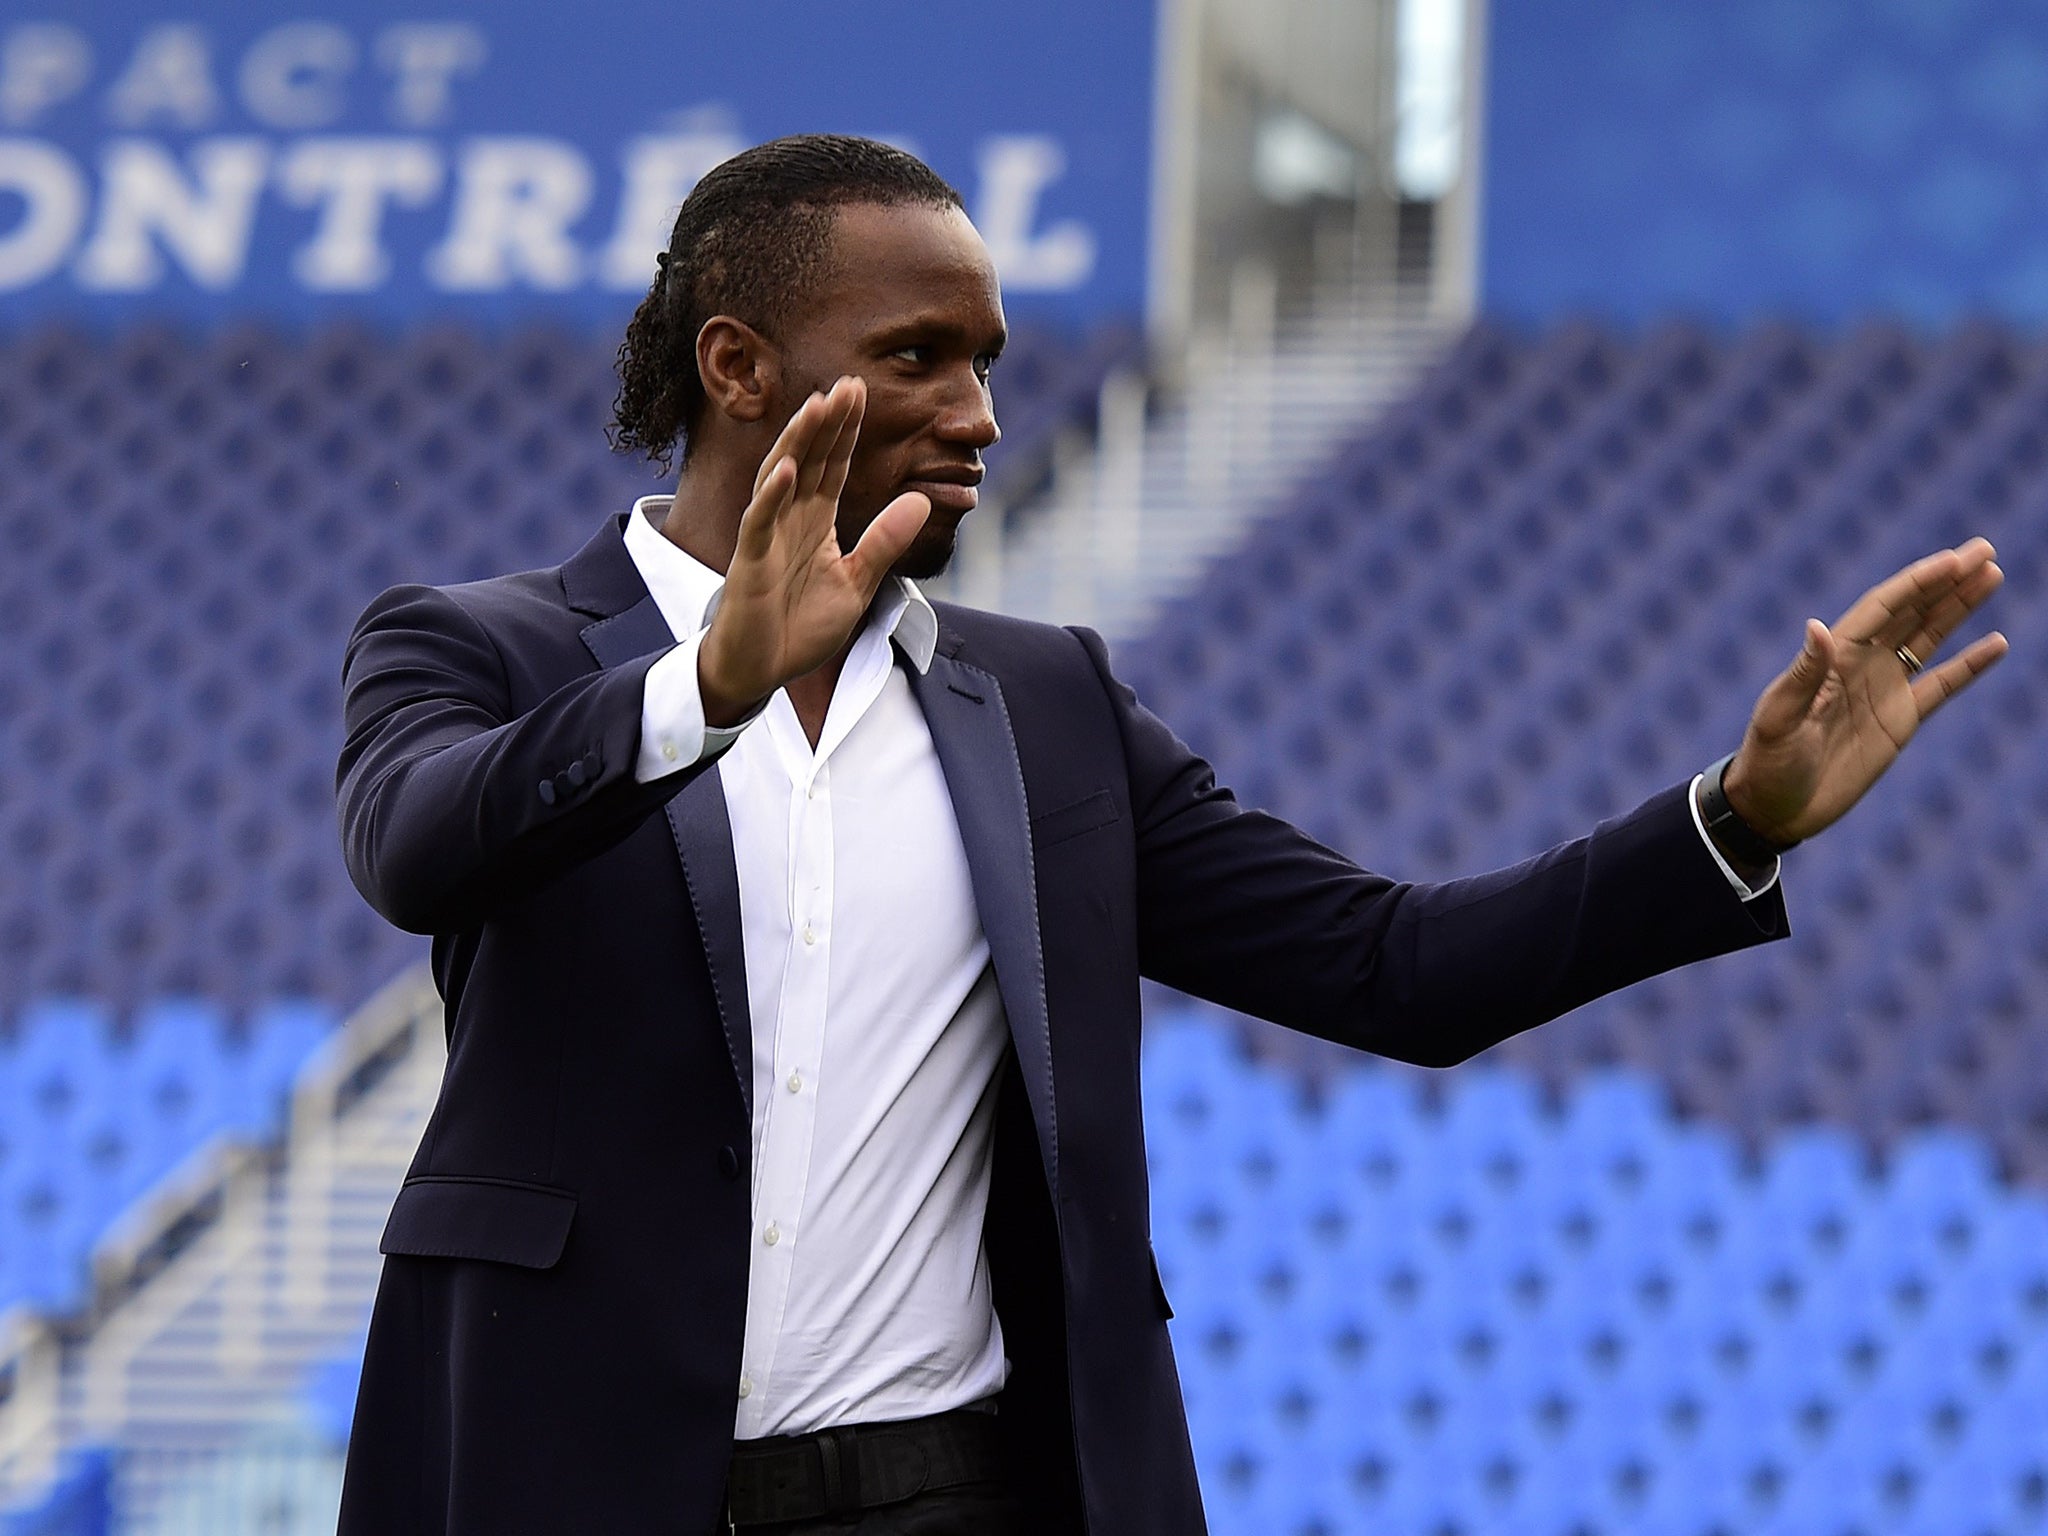 Didier Drogba now plays in the MLS for Montreal Impact